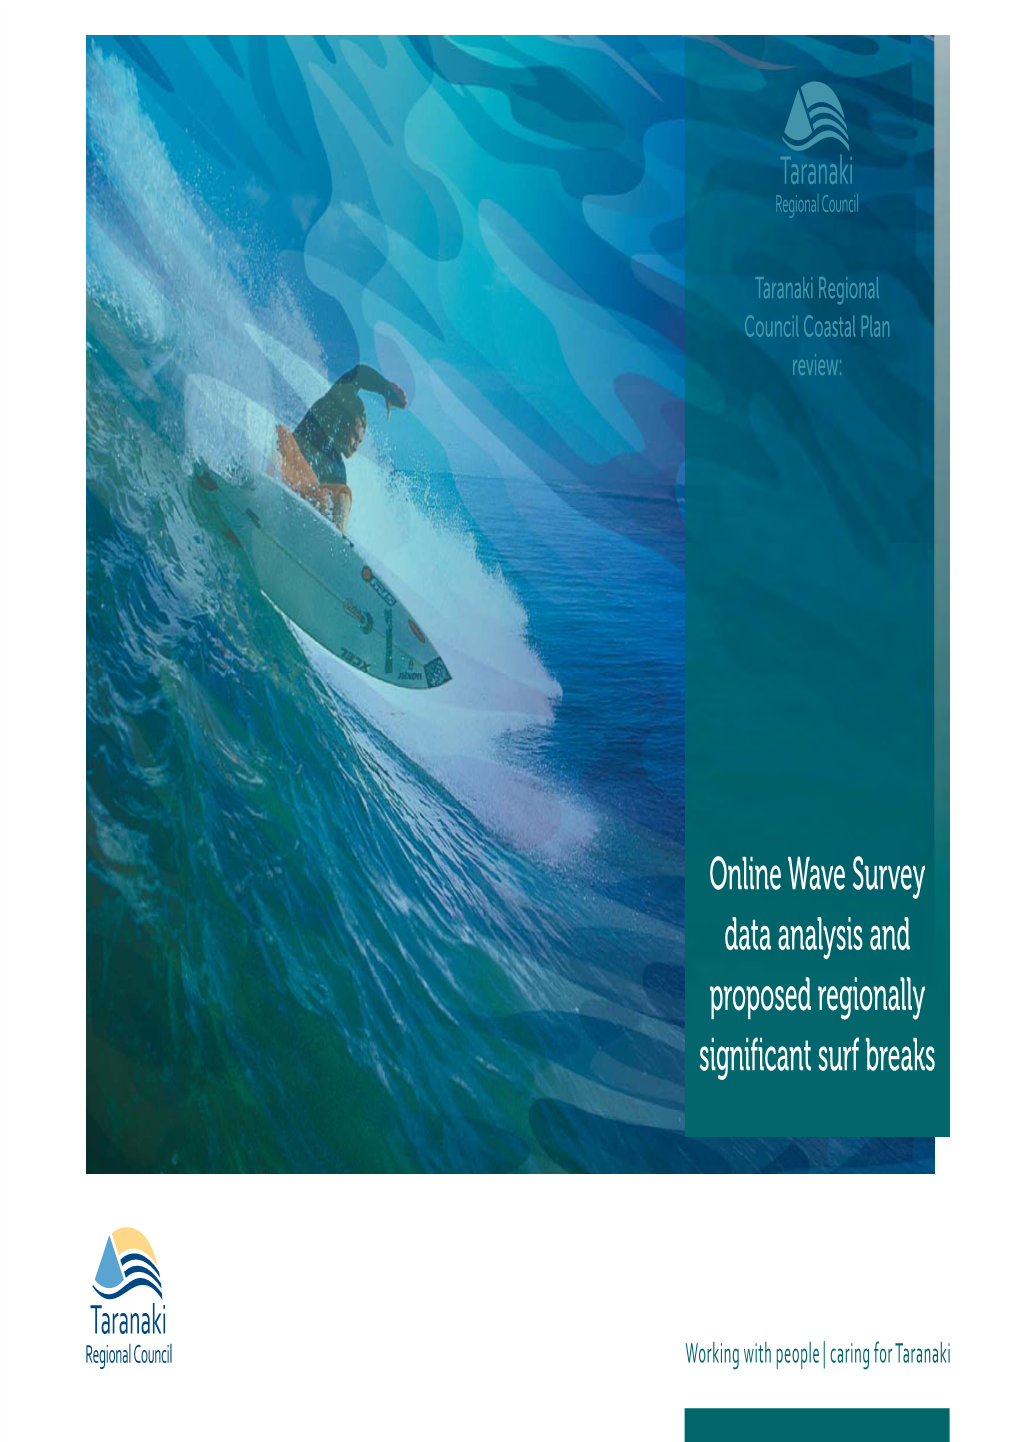 Online Wave Survey Data Analysis & Proposed Regionally Significant Surf Breaks